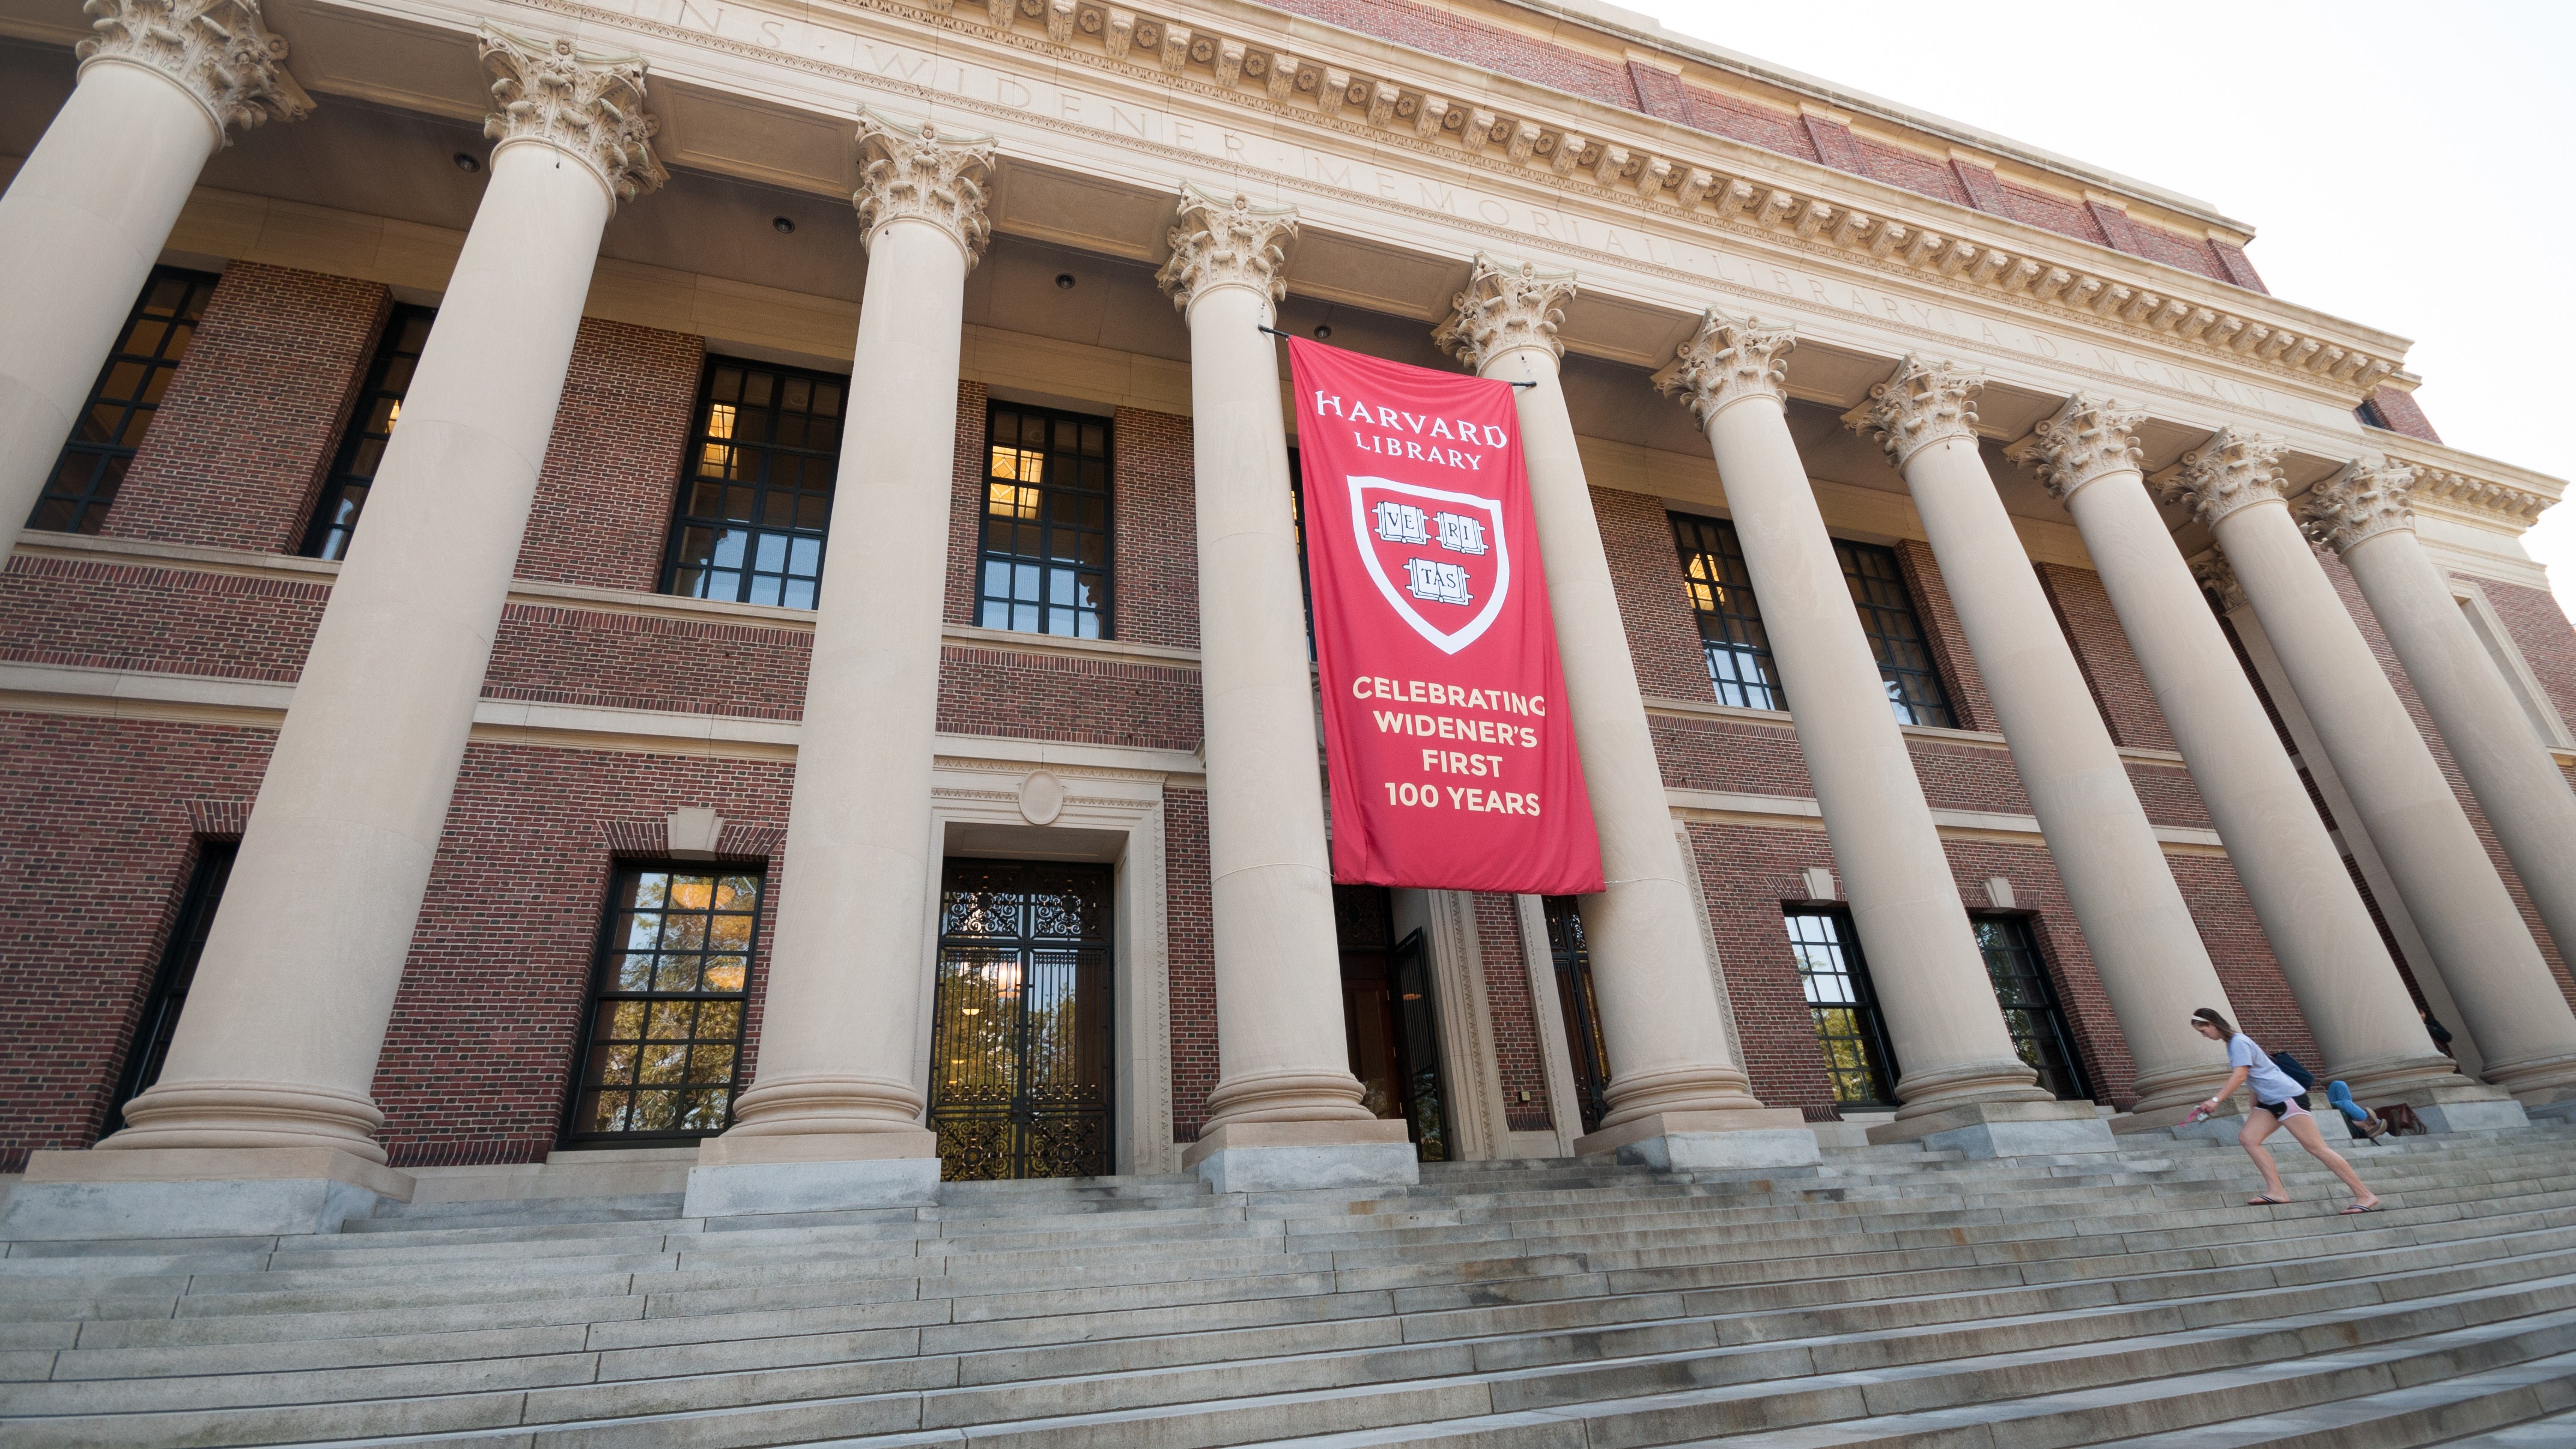 The book, which has been in Harvard Library since 1934, will remain there — without its cover